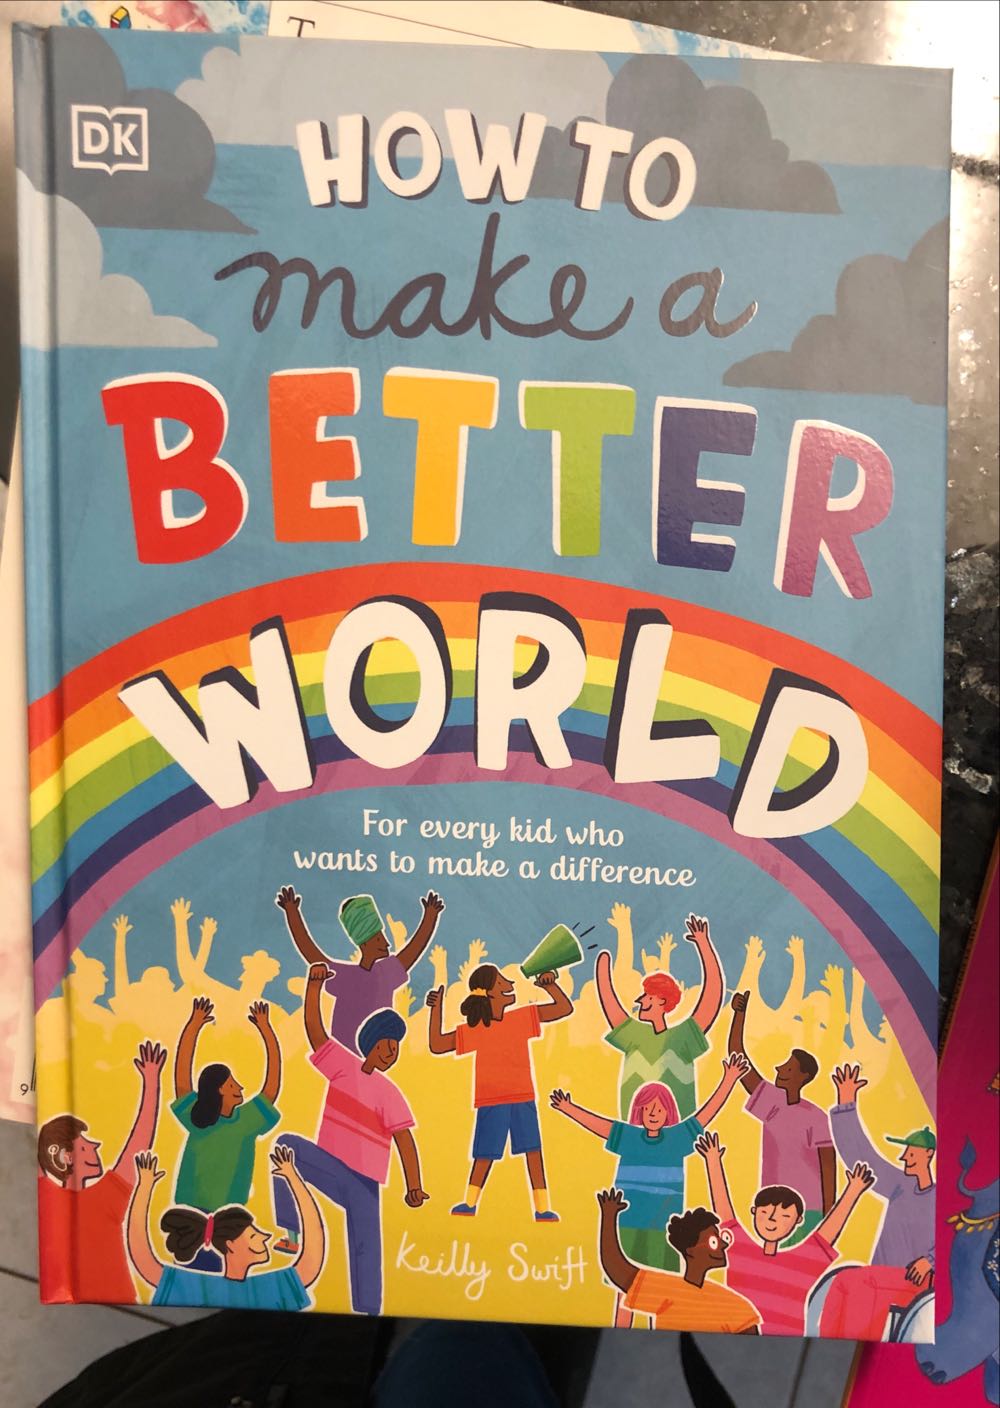 How To Make A Better World - Kelly Swift (Dk) book collectible [Barcode 9780744036718] - Main Image 1